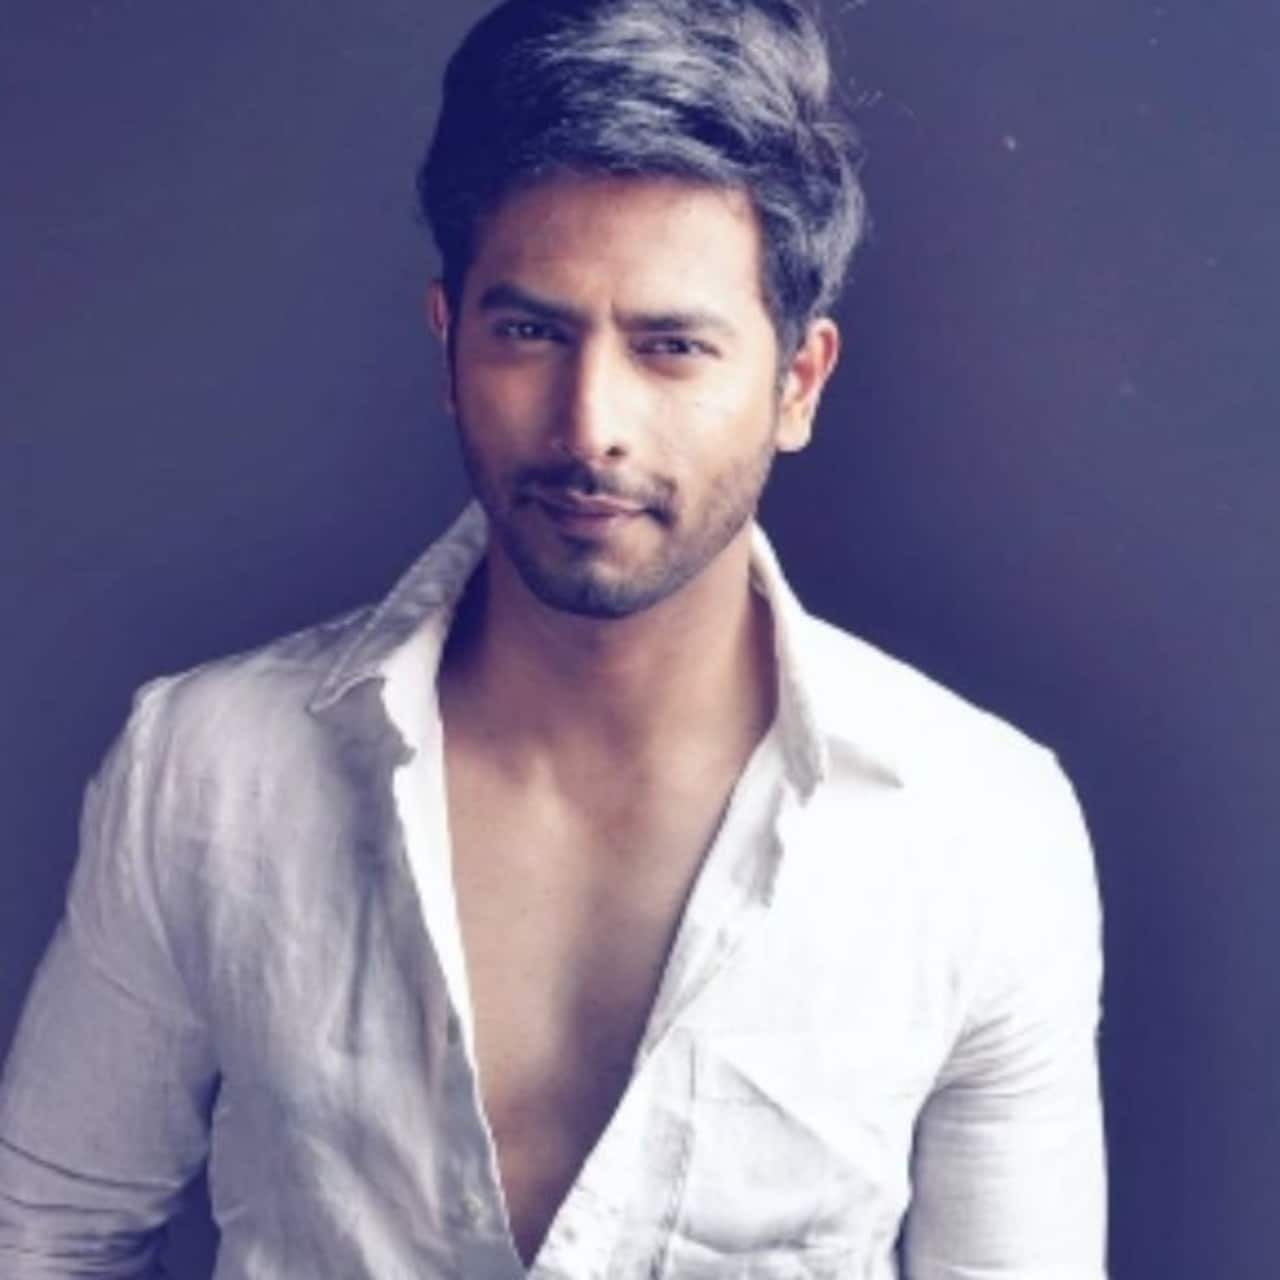 Tujhse Hai Raabta actor Sehban Azim on playing Malhar: I could connect with the character but there was no spark in him